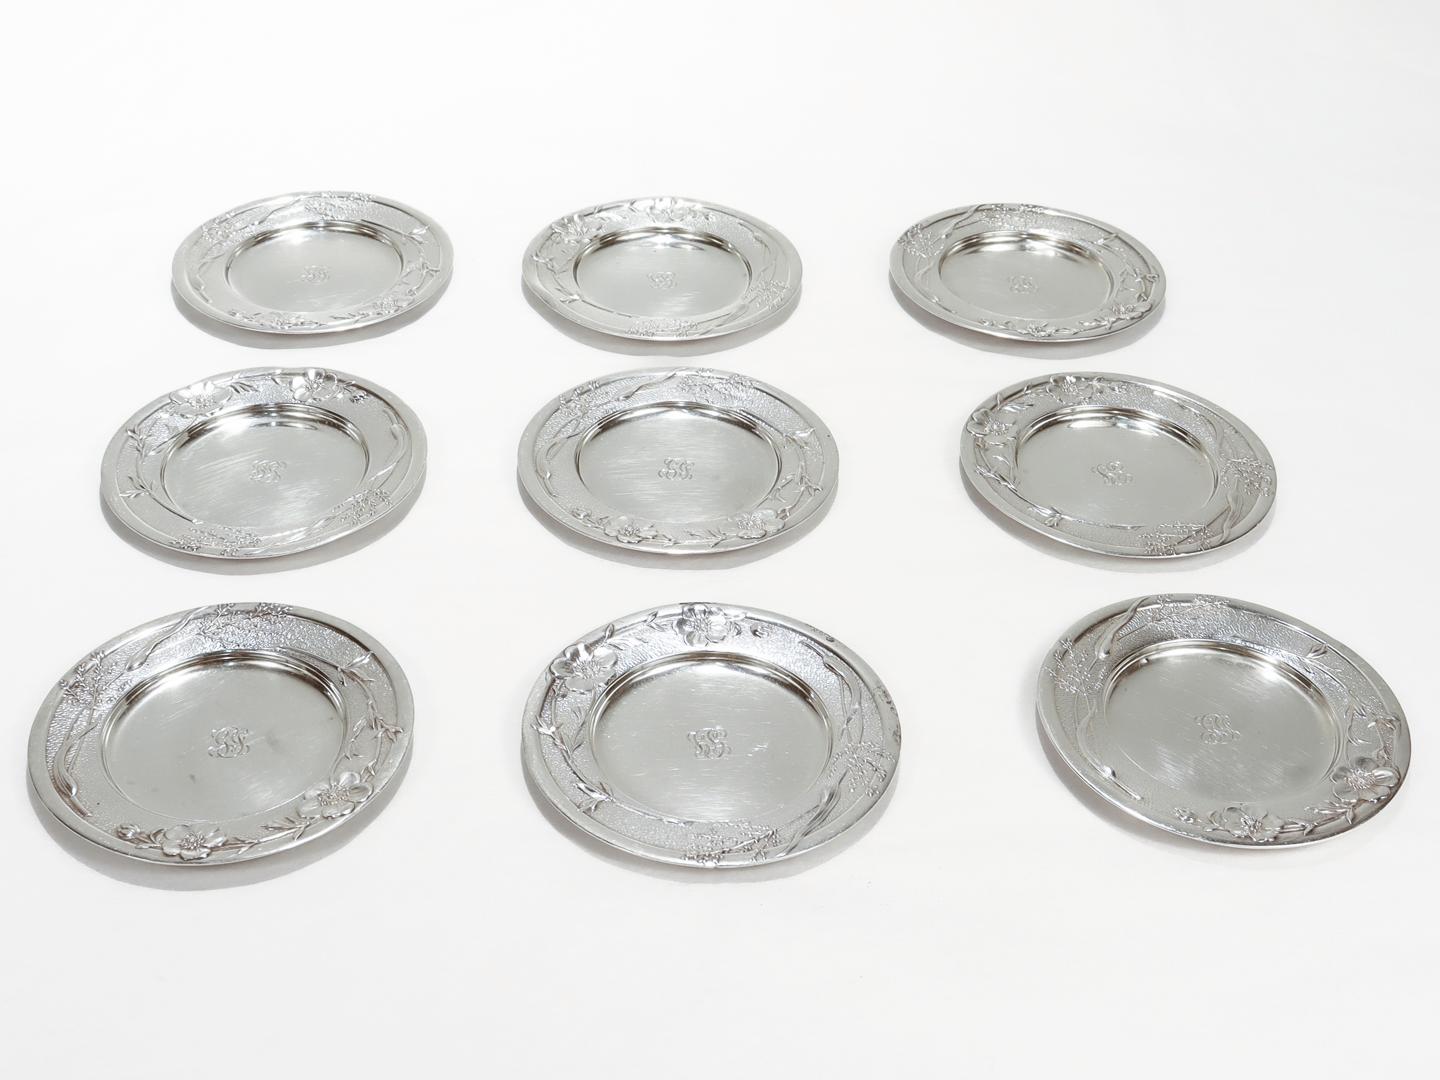 Rare Set of 9 Tiffany & Co. Sterling Silver Vine Pattern Butter Pats For Sale 3